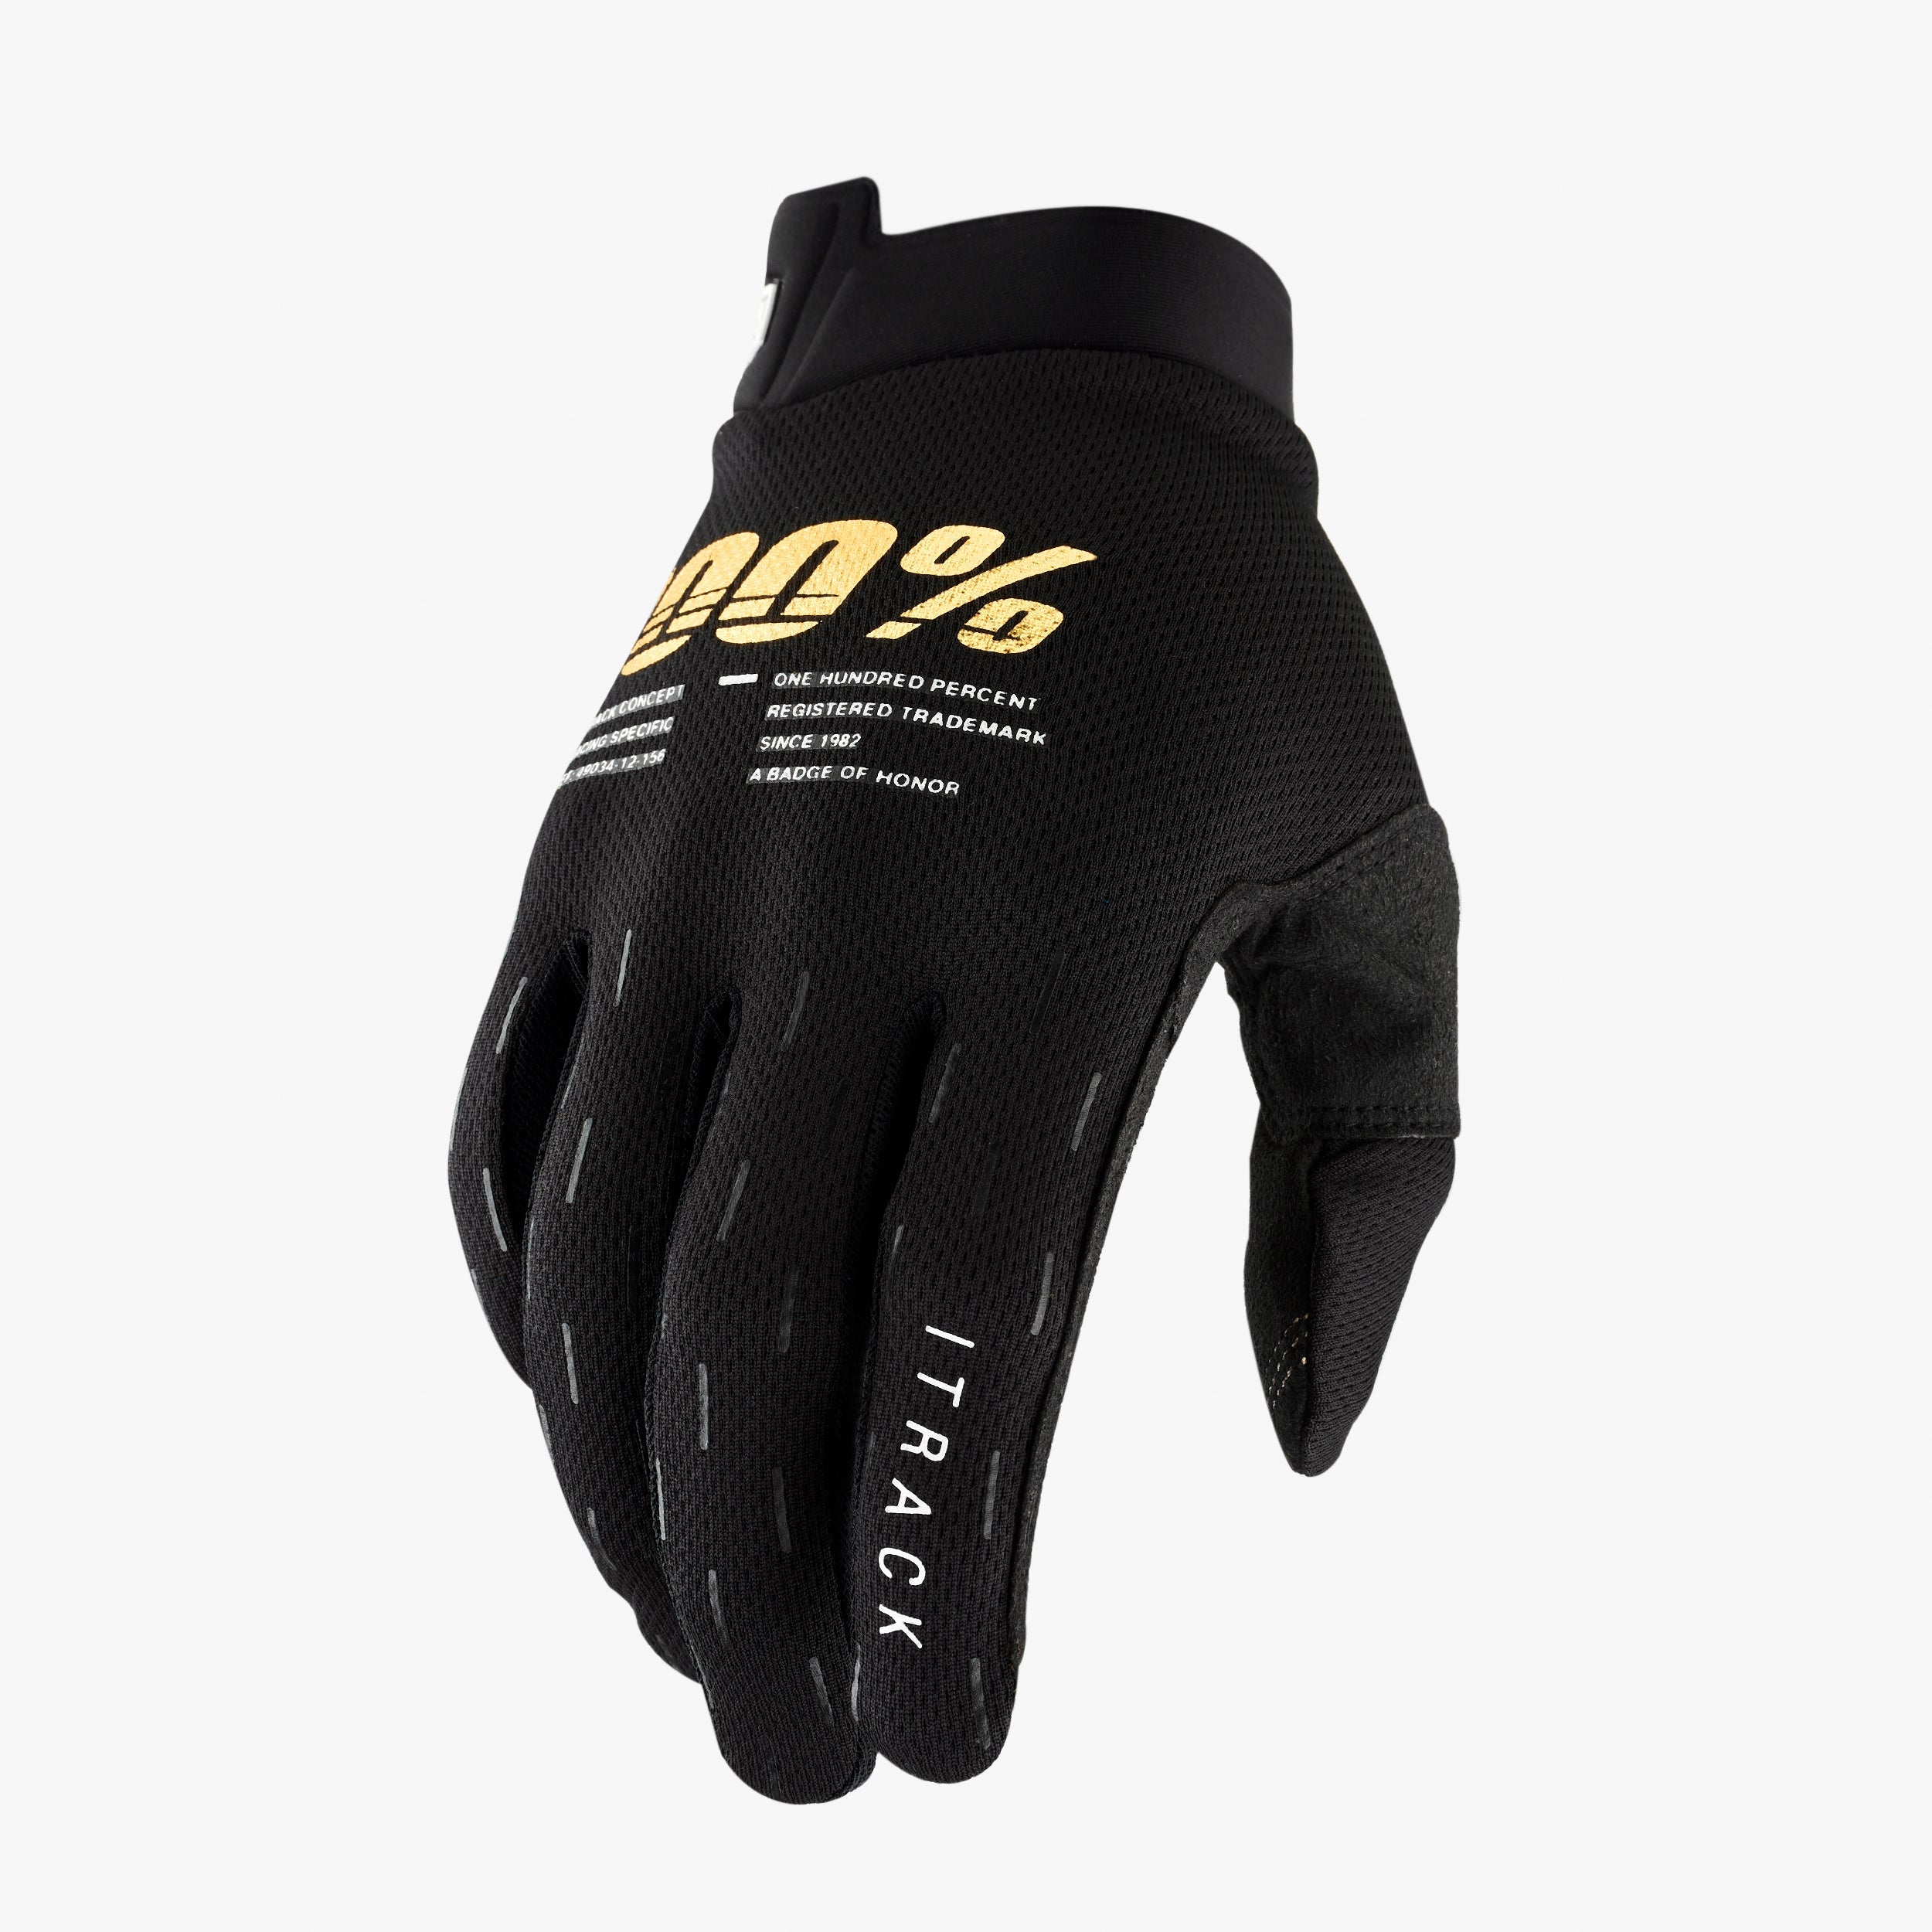 ITRACK Youth Gloves Black